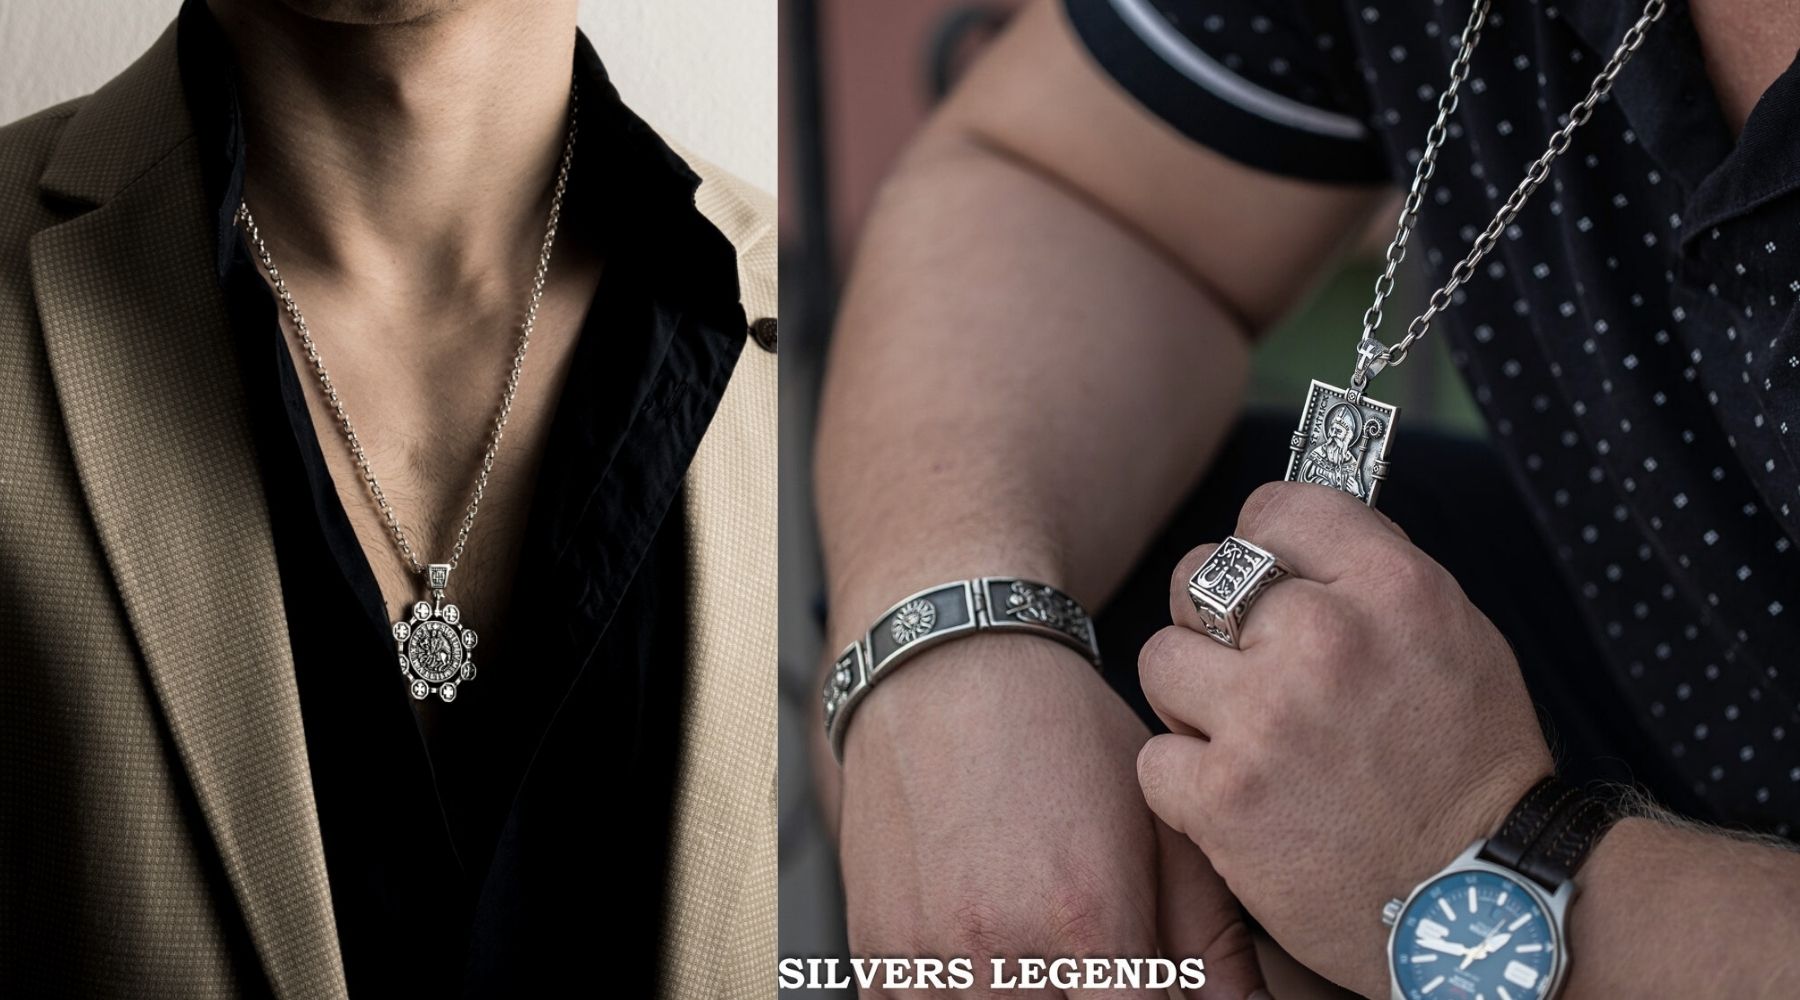 Benefits of silver jewelry